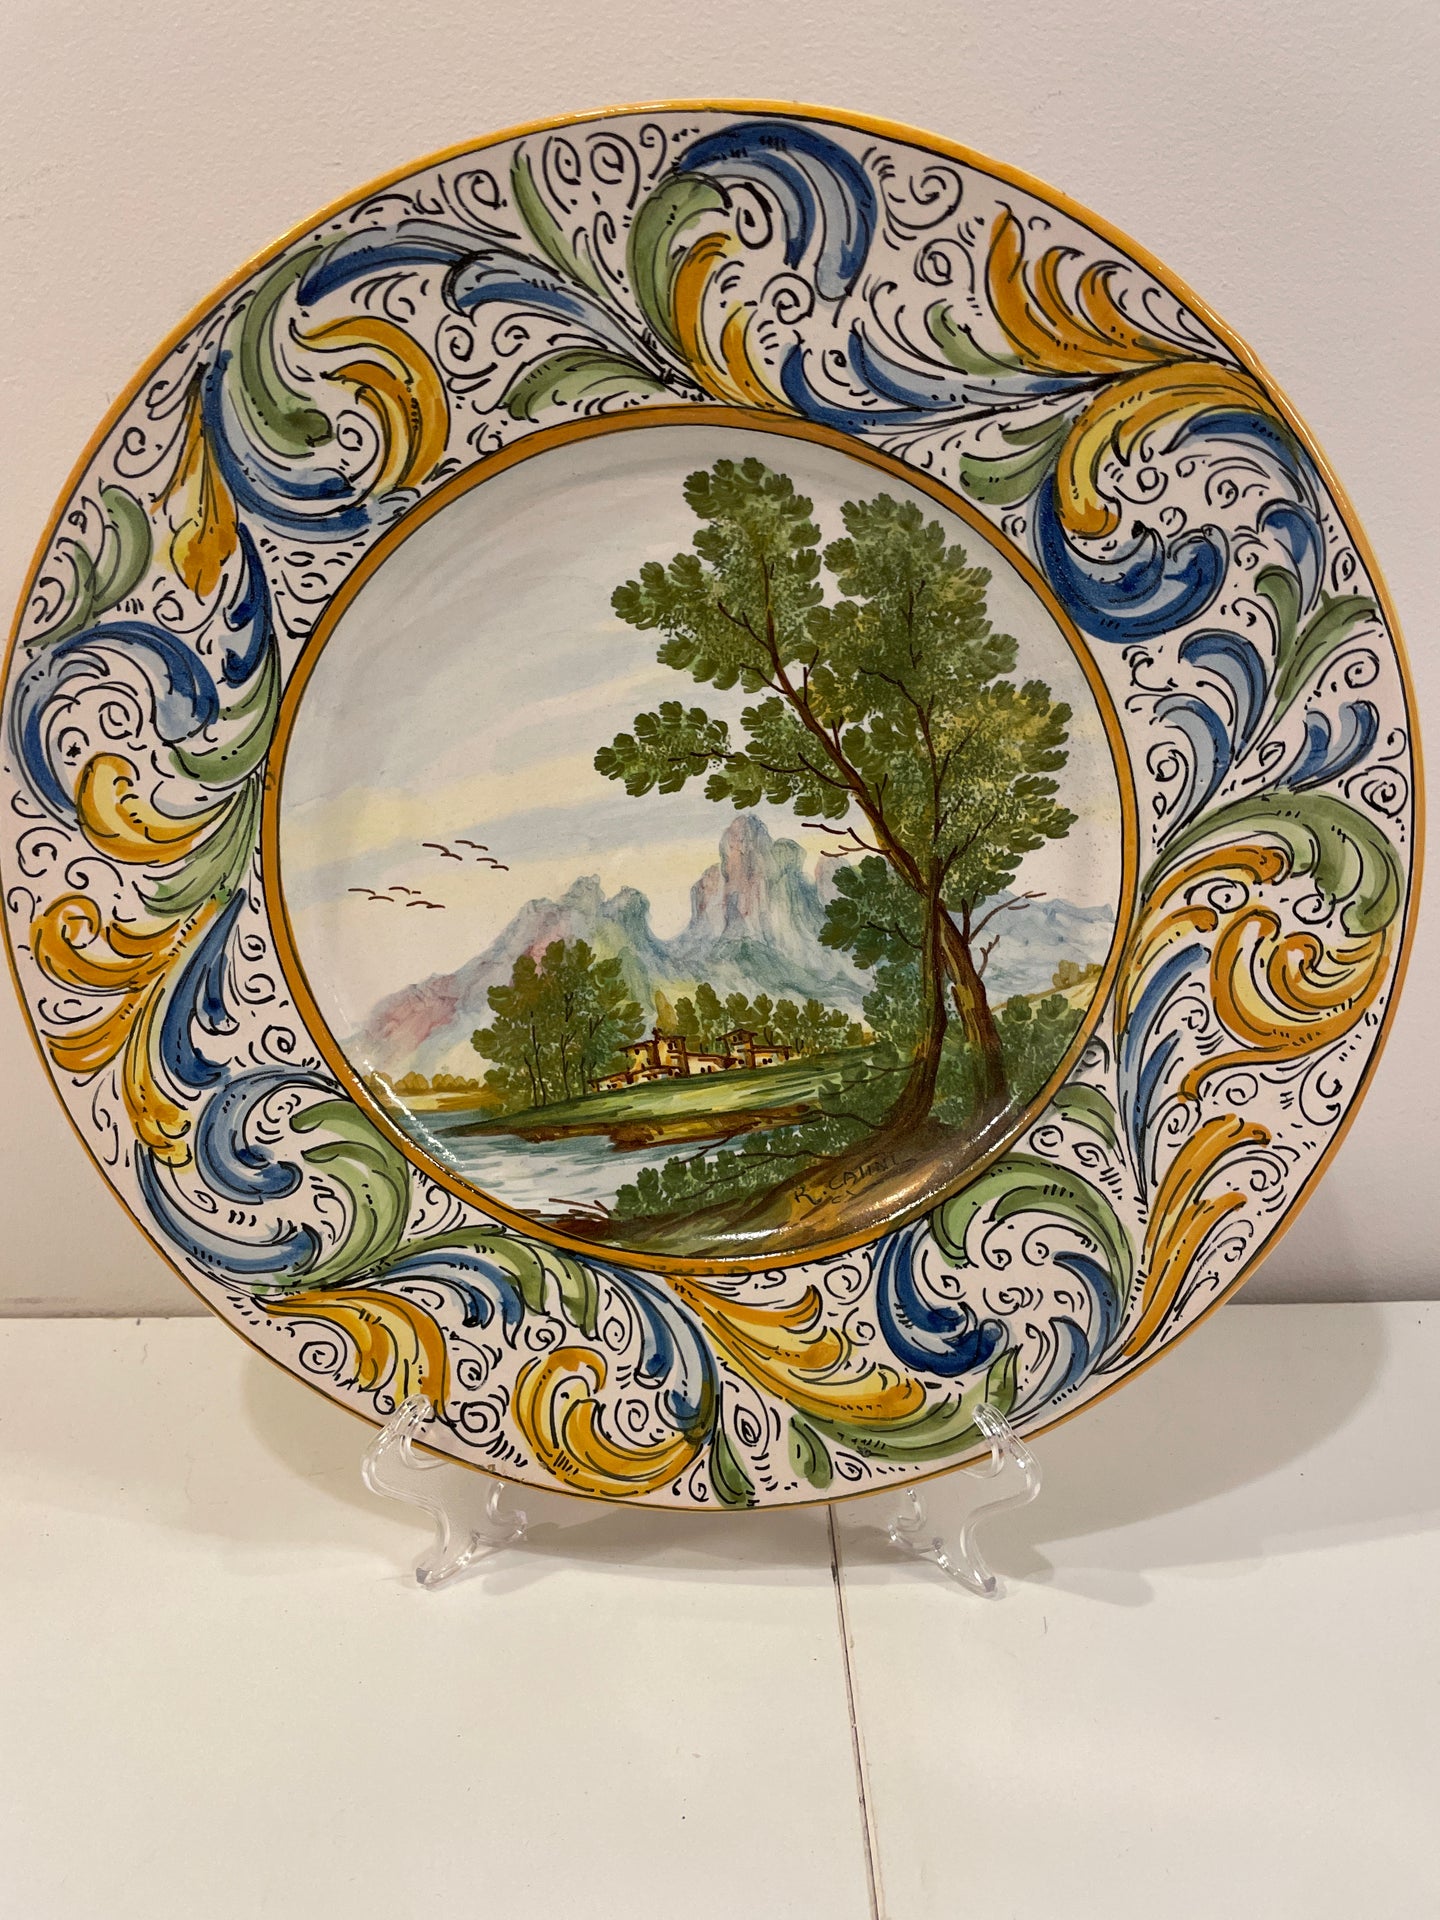 Large Plate with Italian Countryside Scene, from Castelli